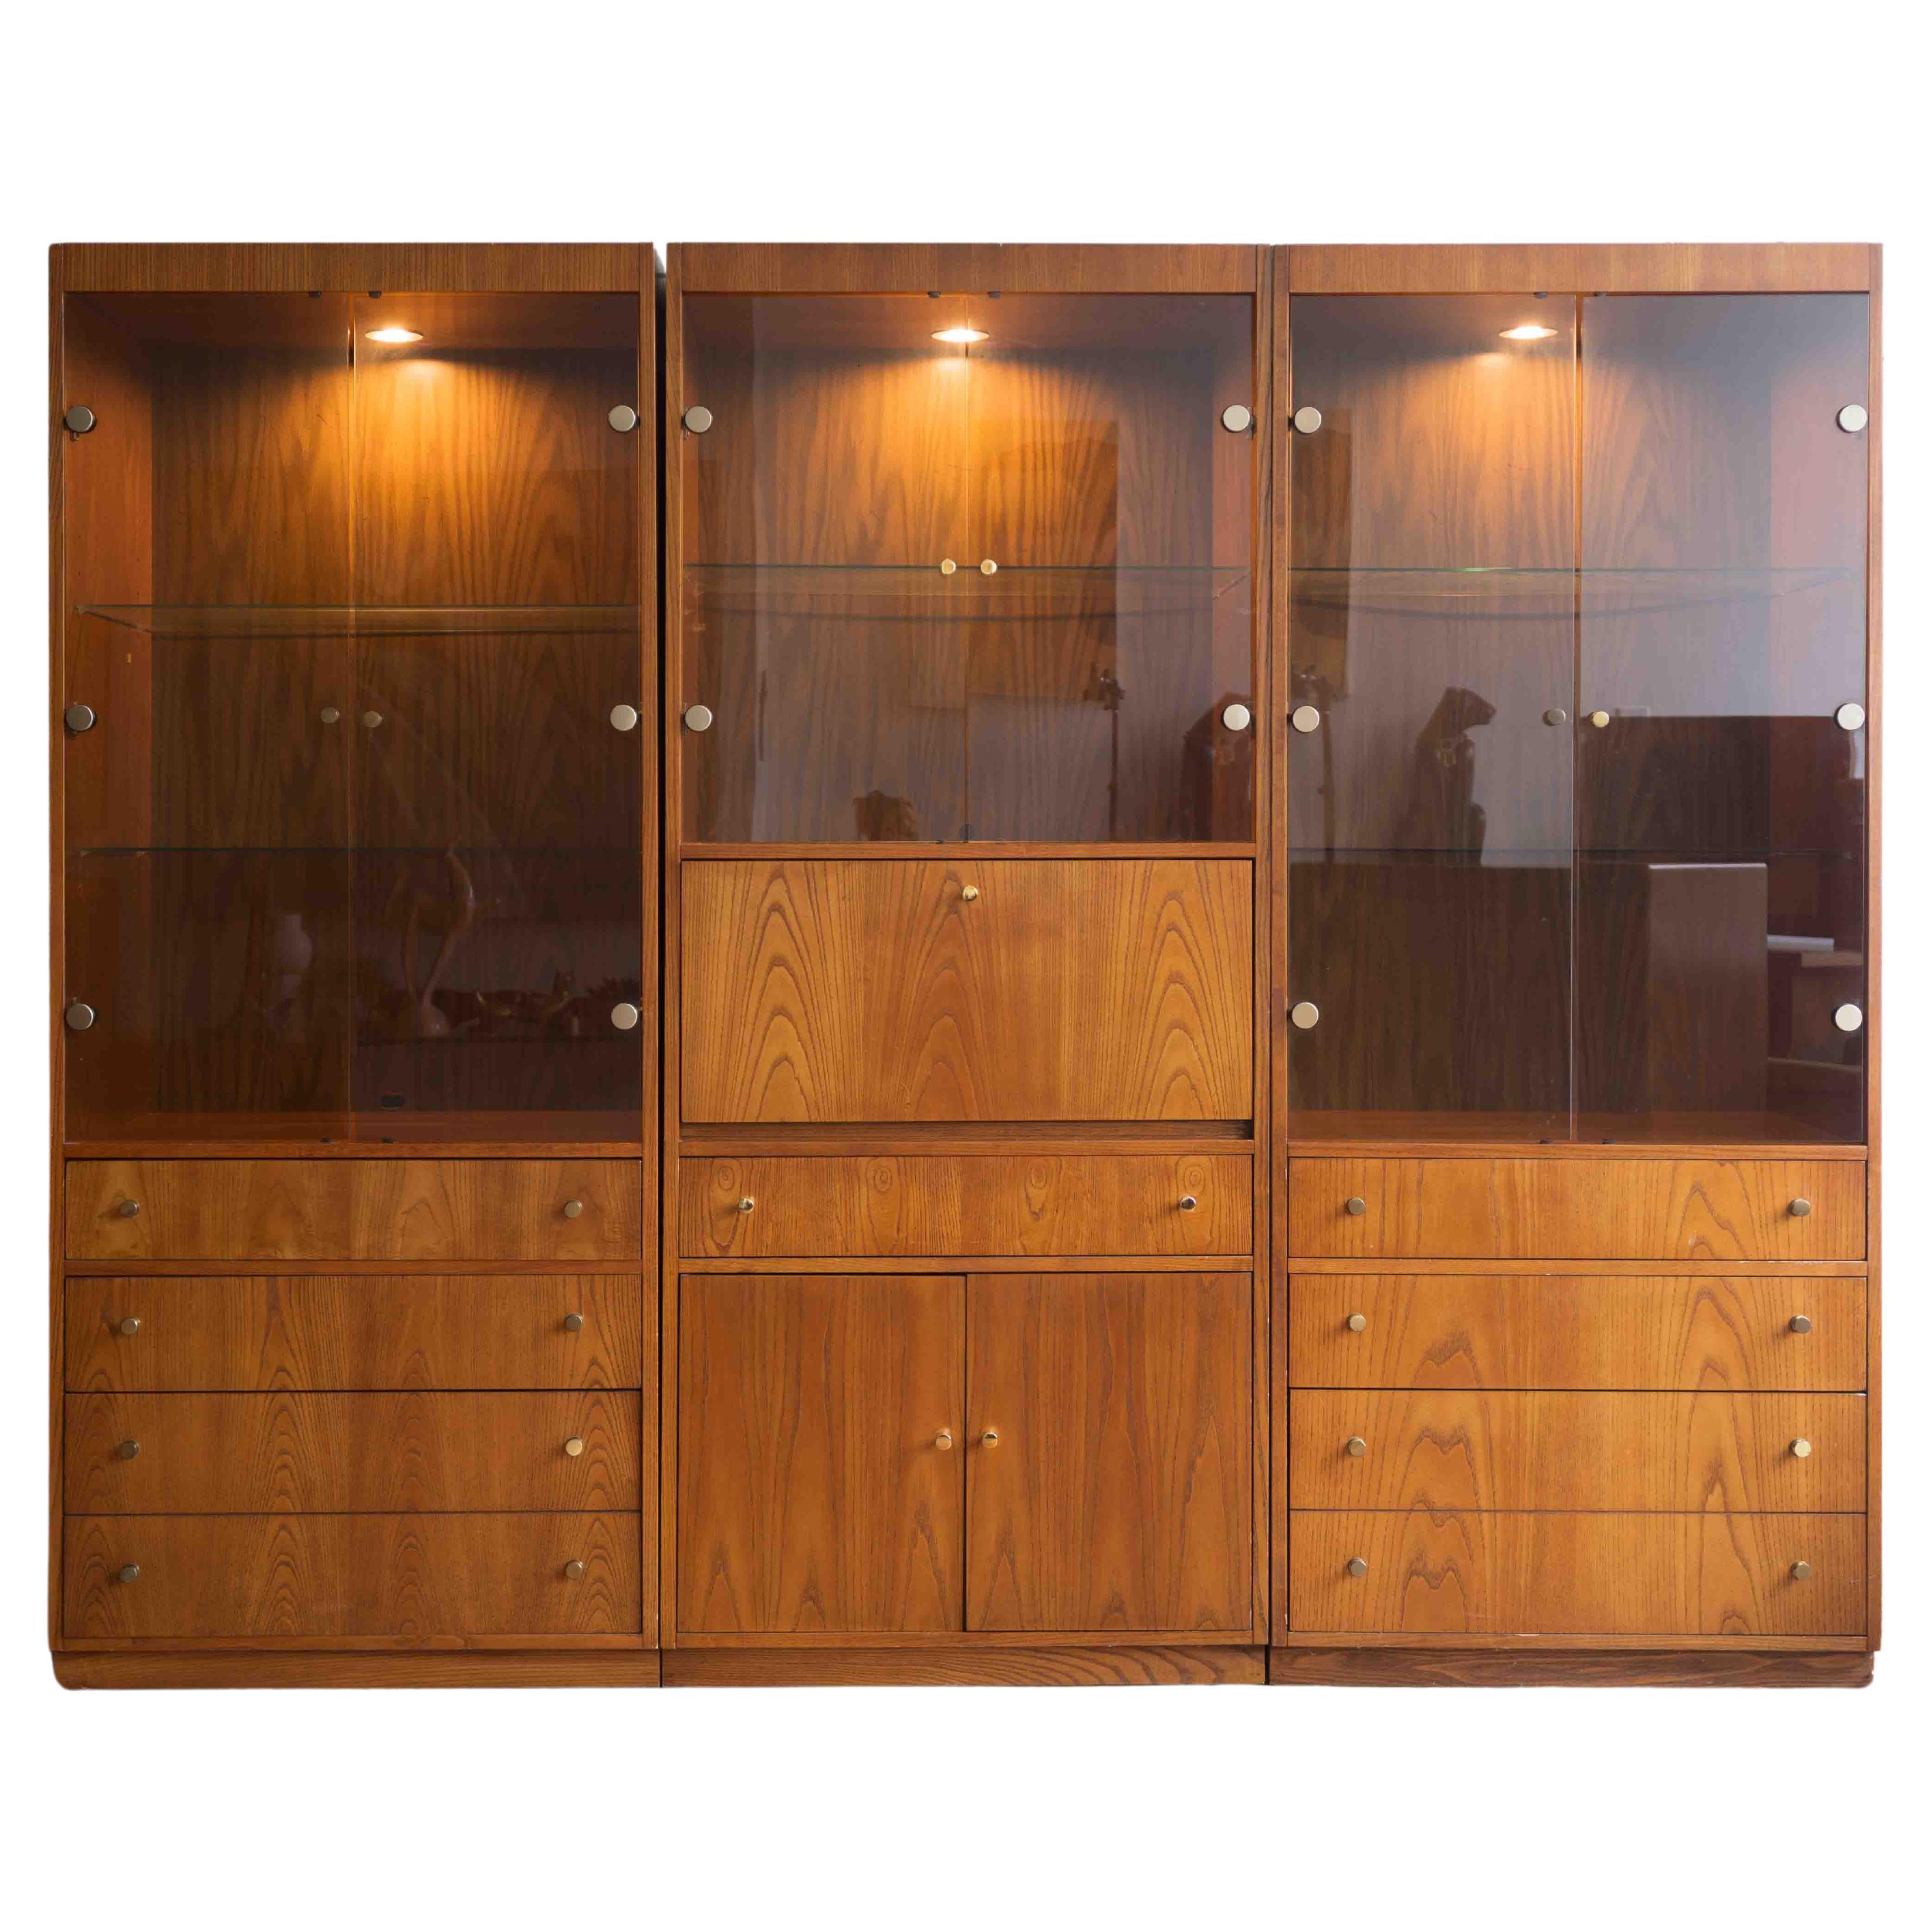 Mid-century 3 bay lighted display cabinet / wall unit with desk For Sale